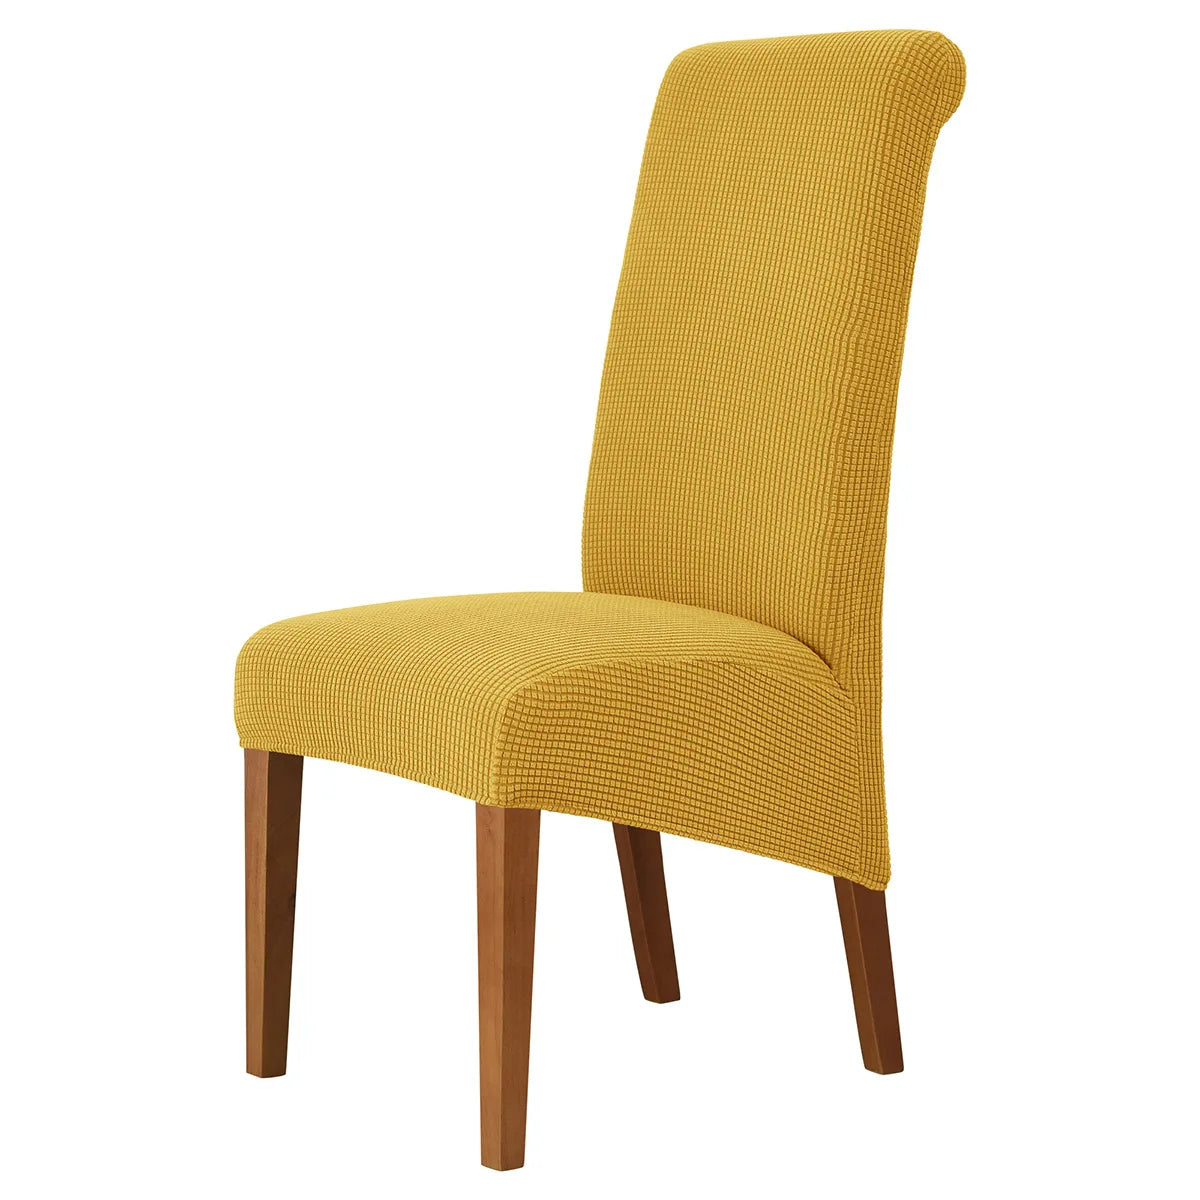 Universal High Back Dining  Chair Covers